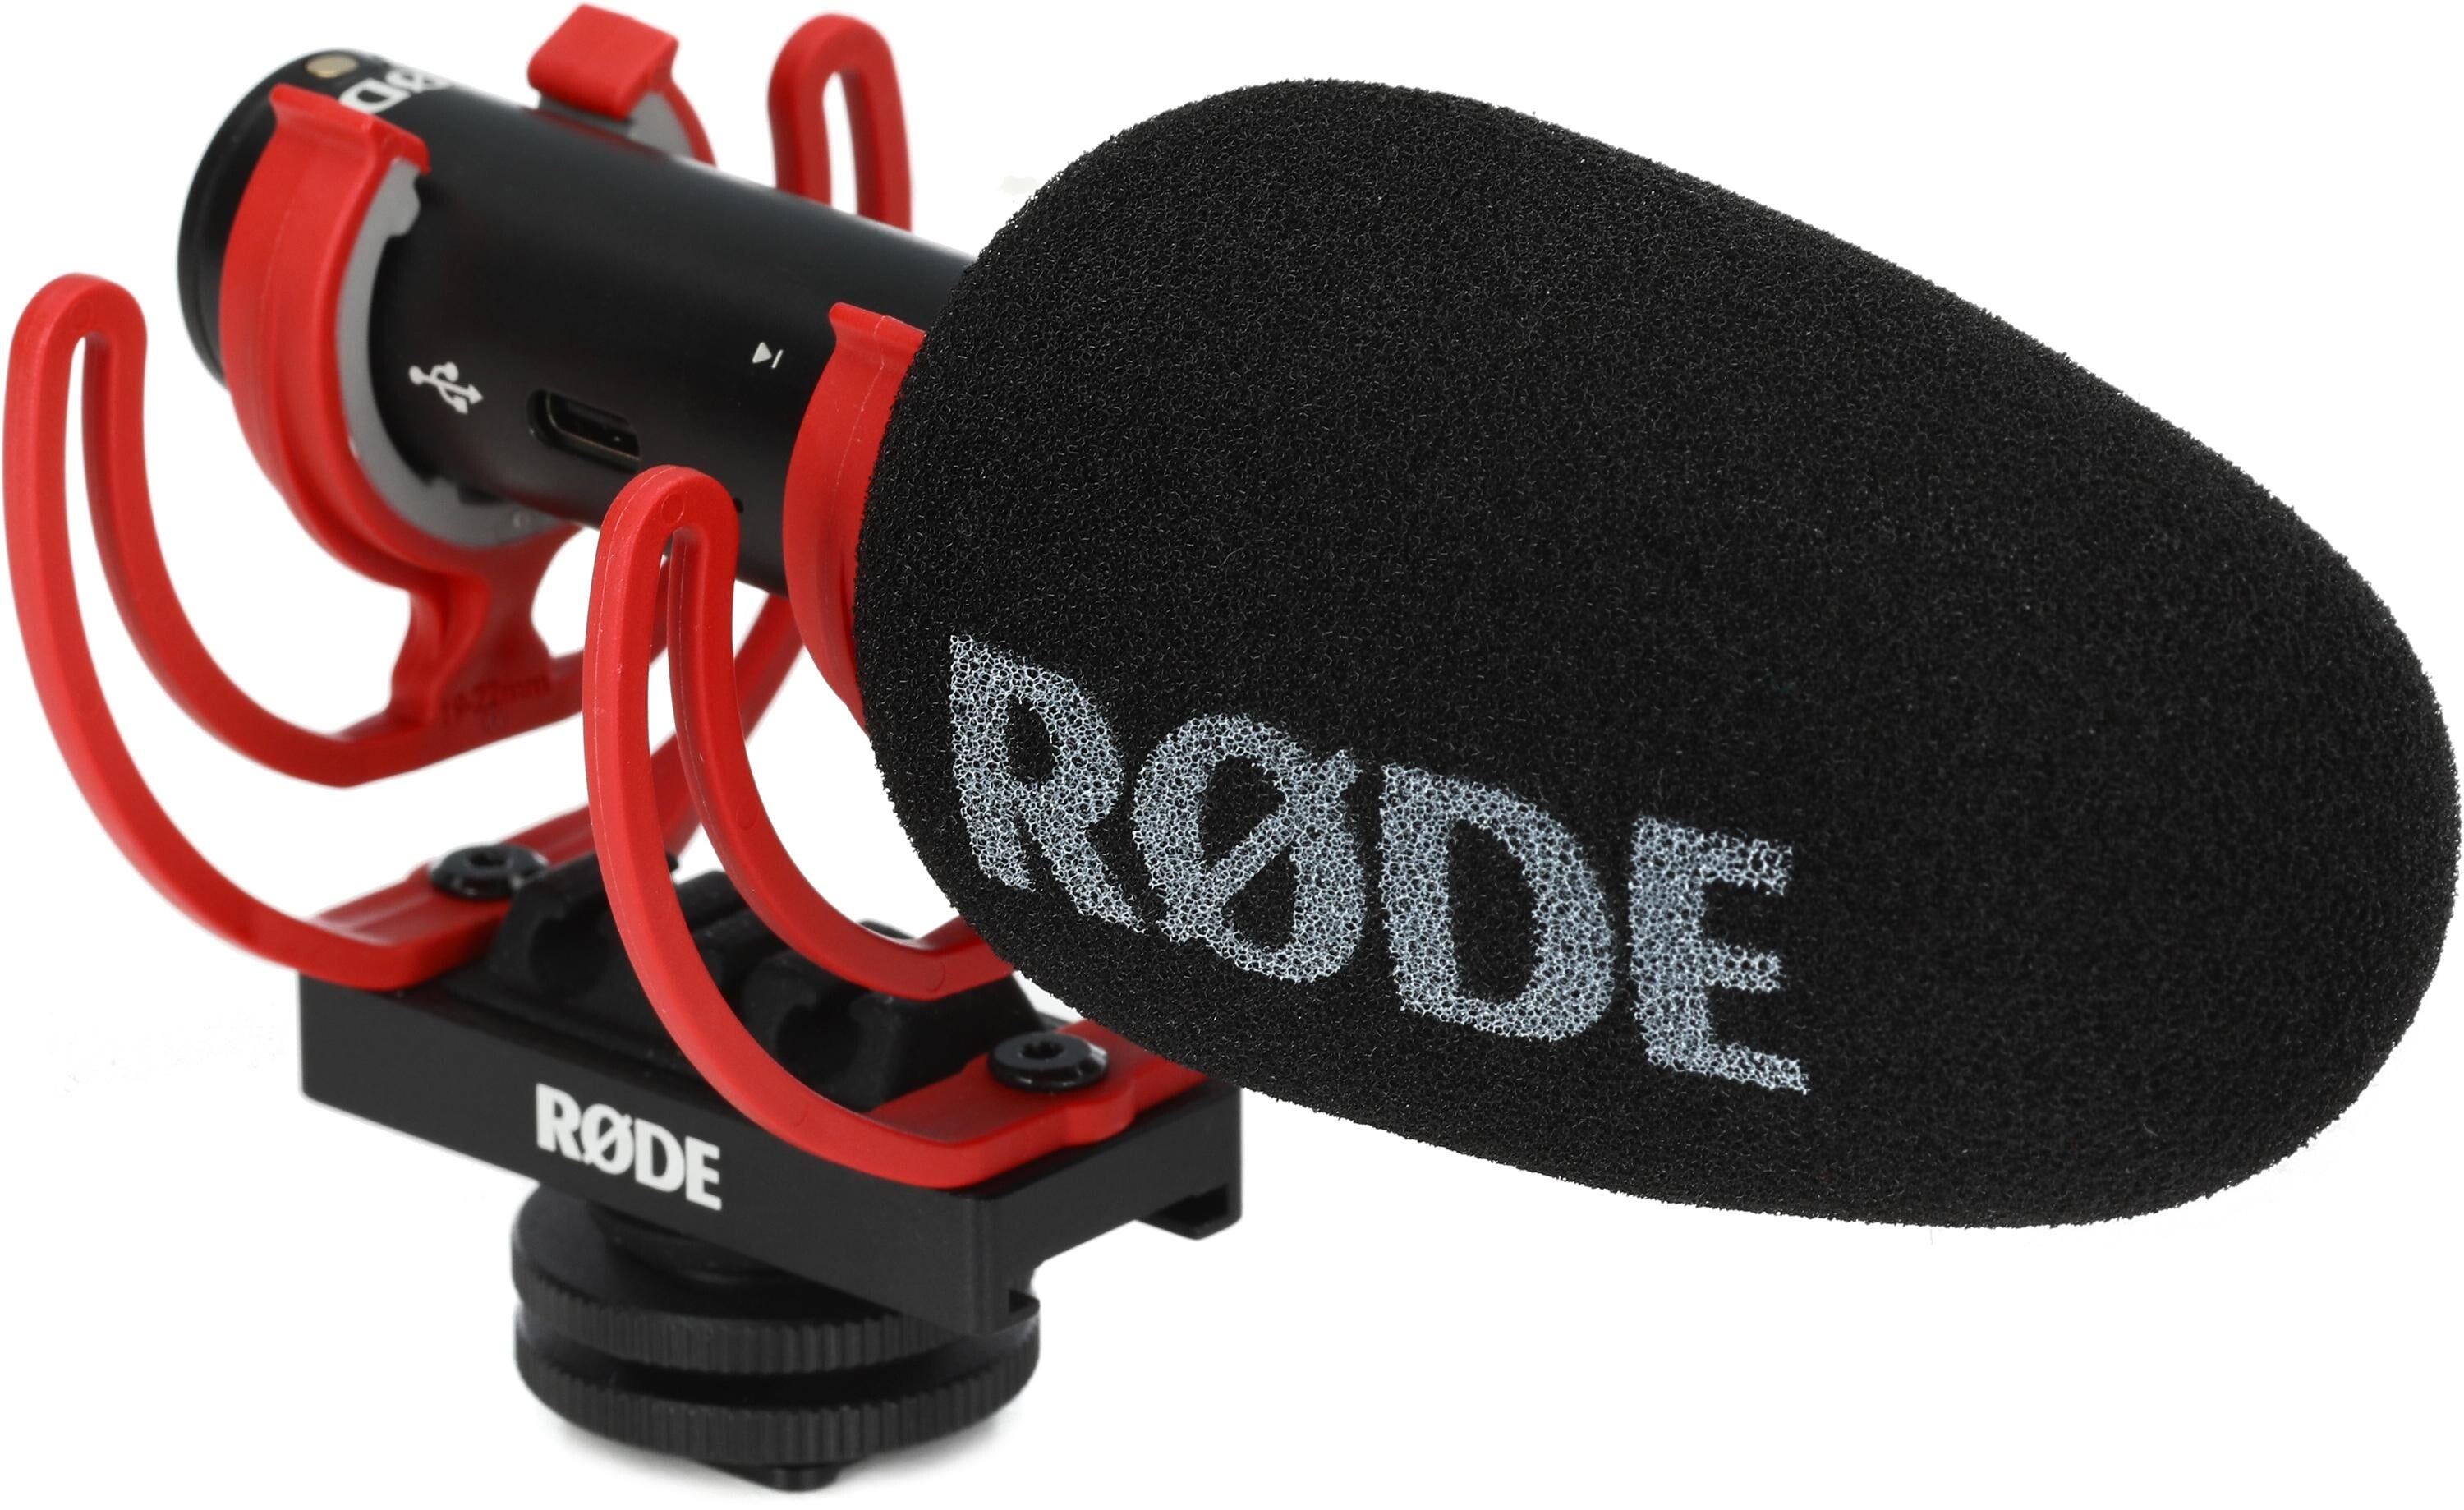 Rode VideoMicro Vs VideoMic Go Which Should You Buy? 